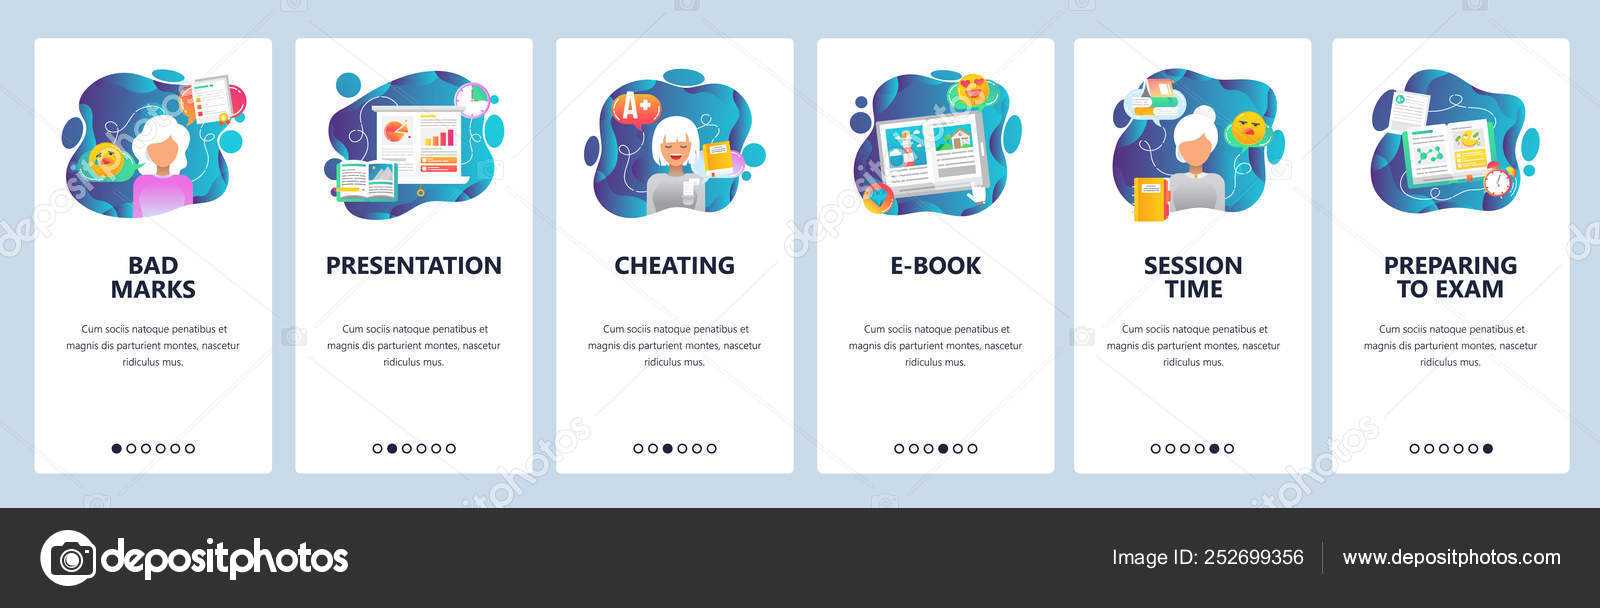 Mobile App Onboarding Screens. School And College Education Inside College Banner Template